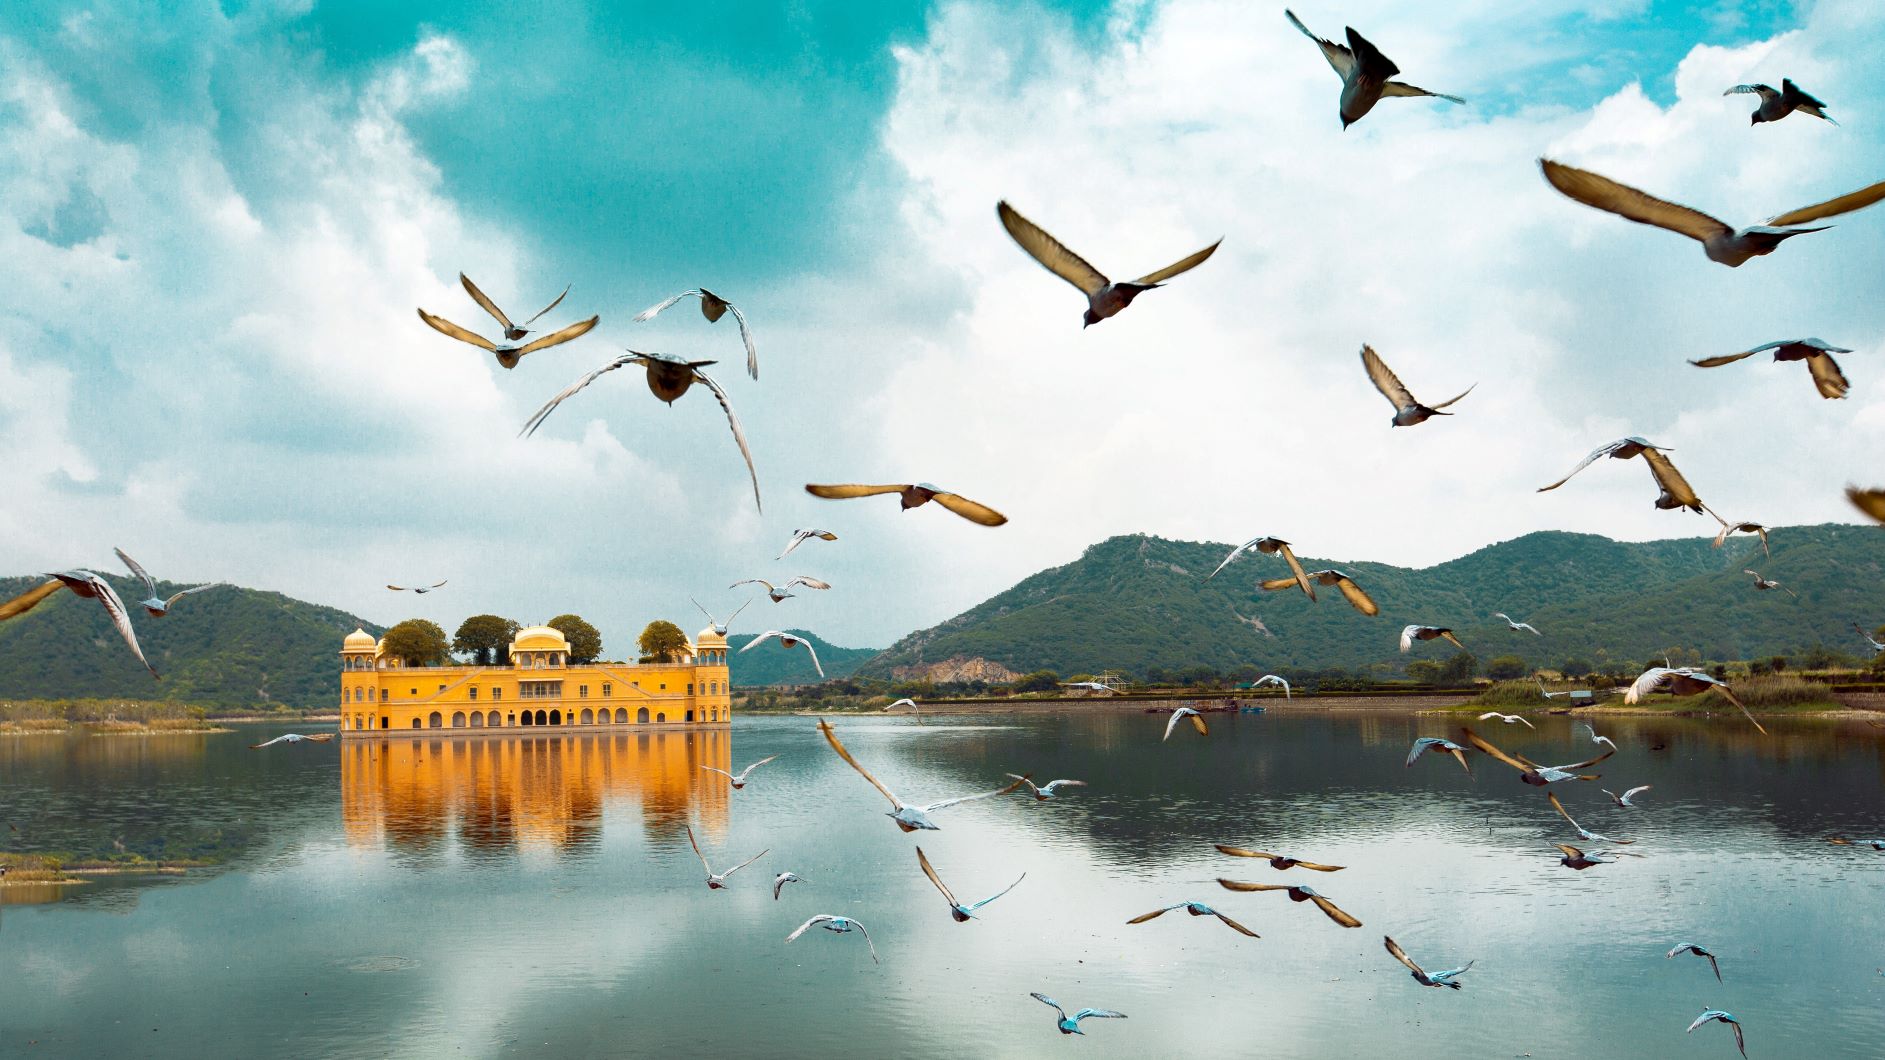 5 Remarkable Top Places to Visit in Jaipur - Complete City Guide